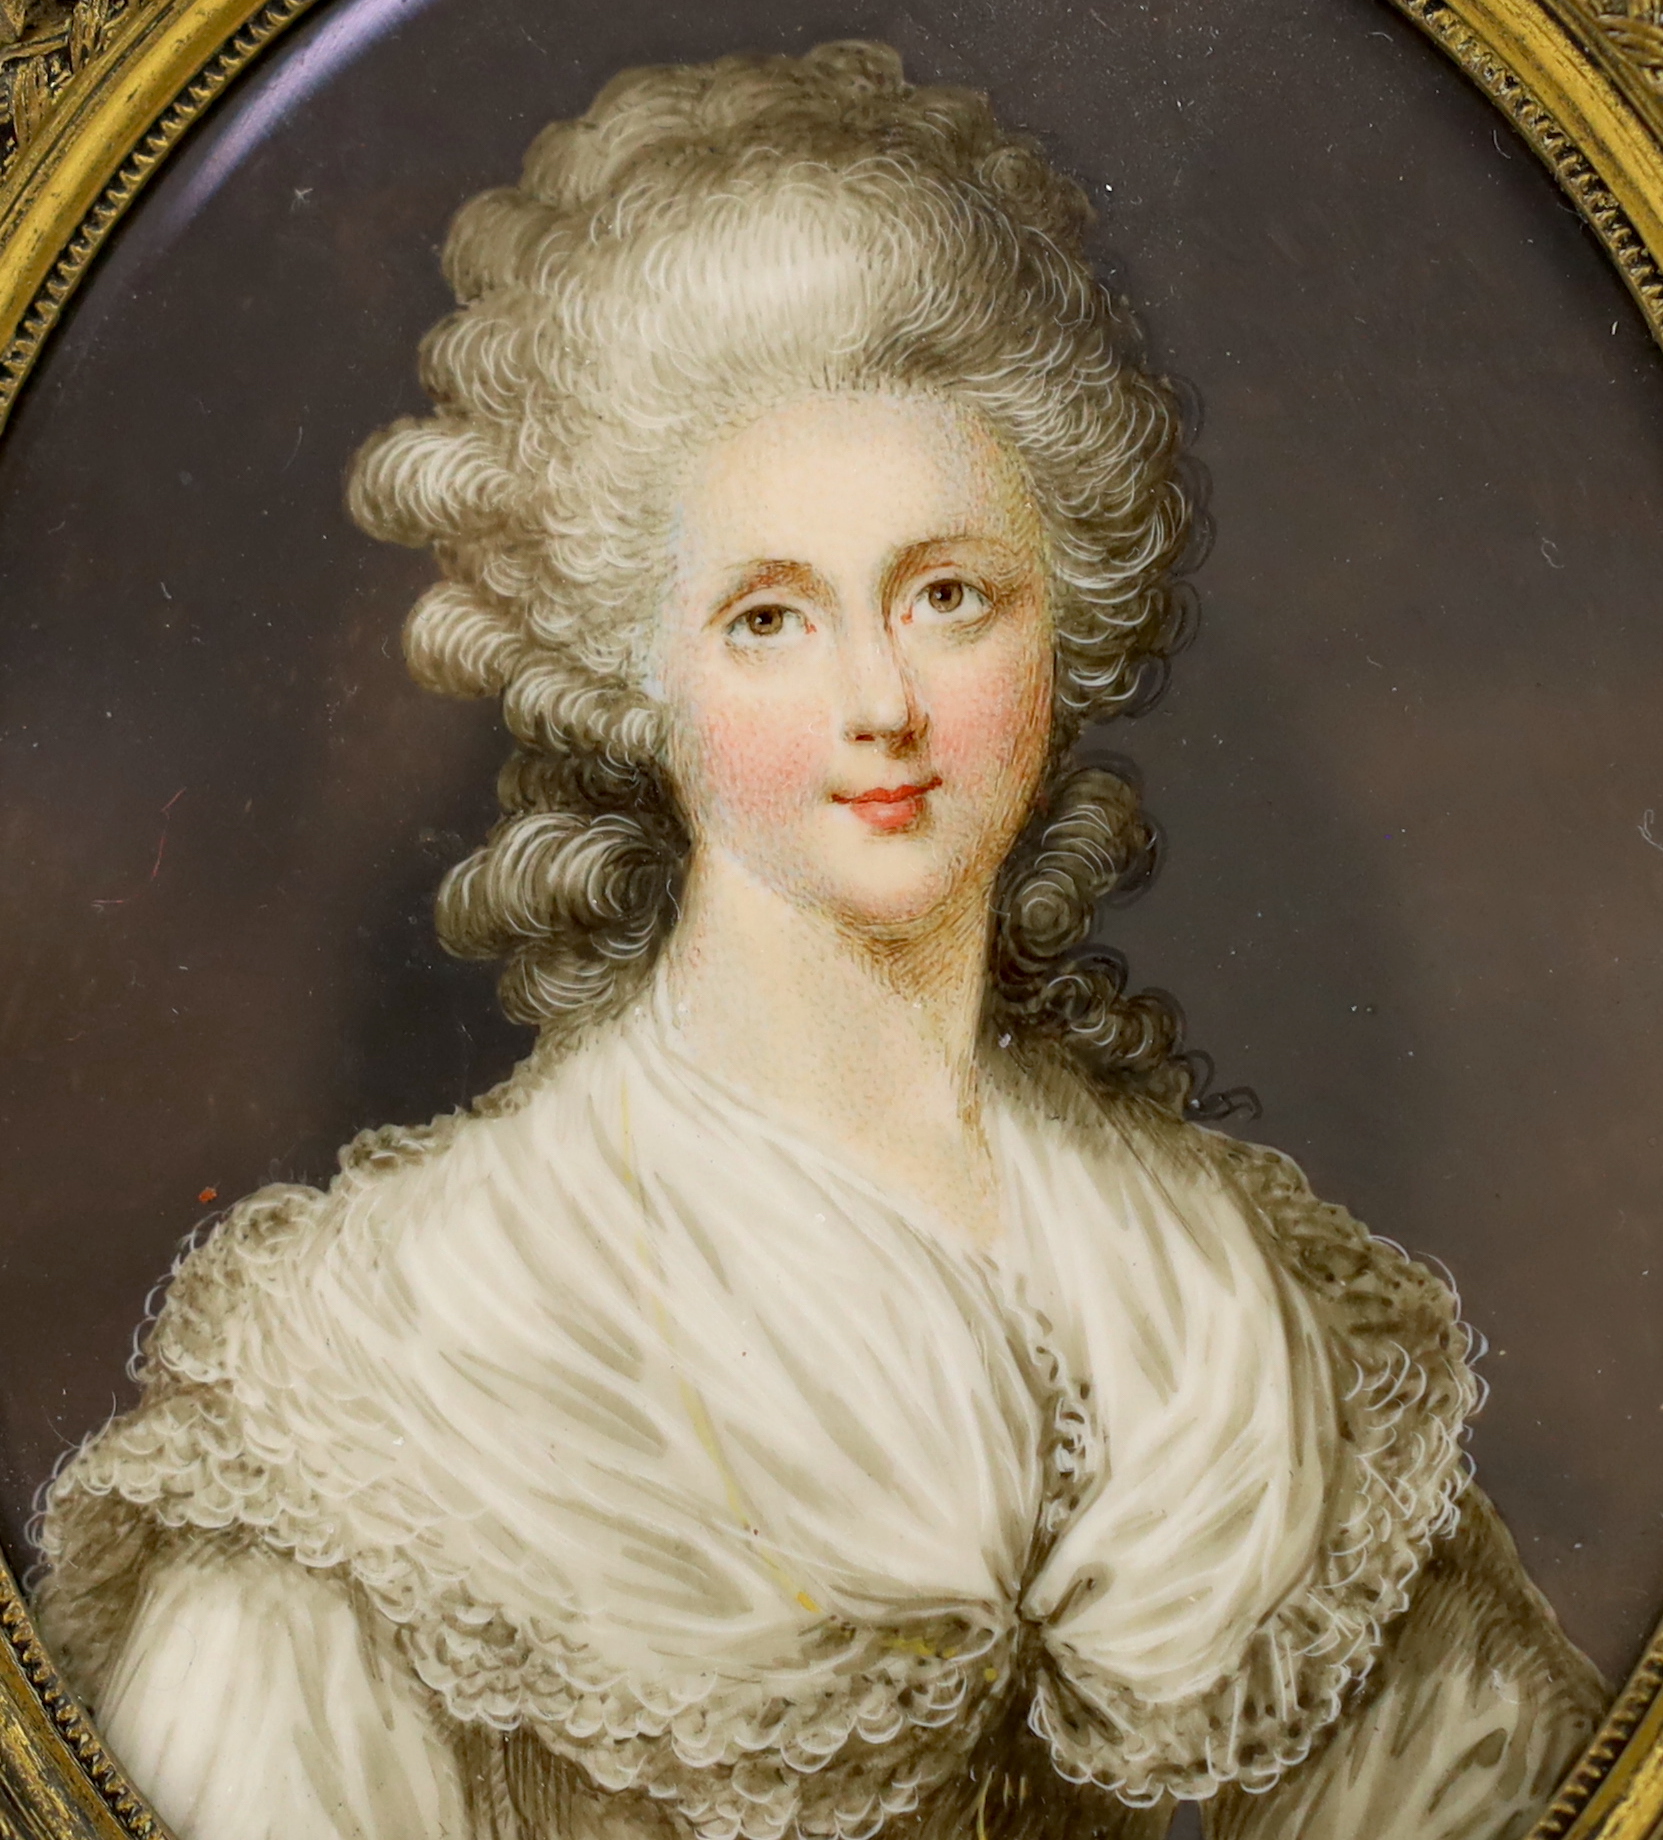 After Ozias Humphrey (English, 1742-1810), Portrait miniature of Sarah Villiers, Viscountess of Jersey, watercolour on ivory, 8.7 x 7cm. CITES Submission reference CZ9HM9C7